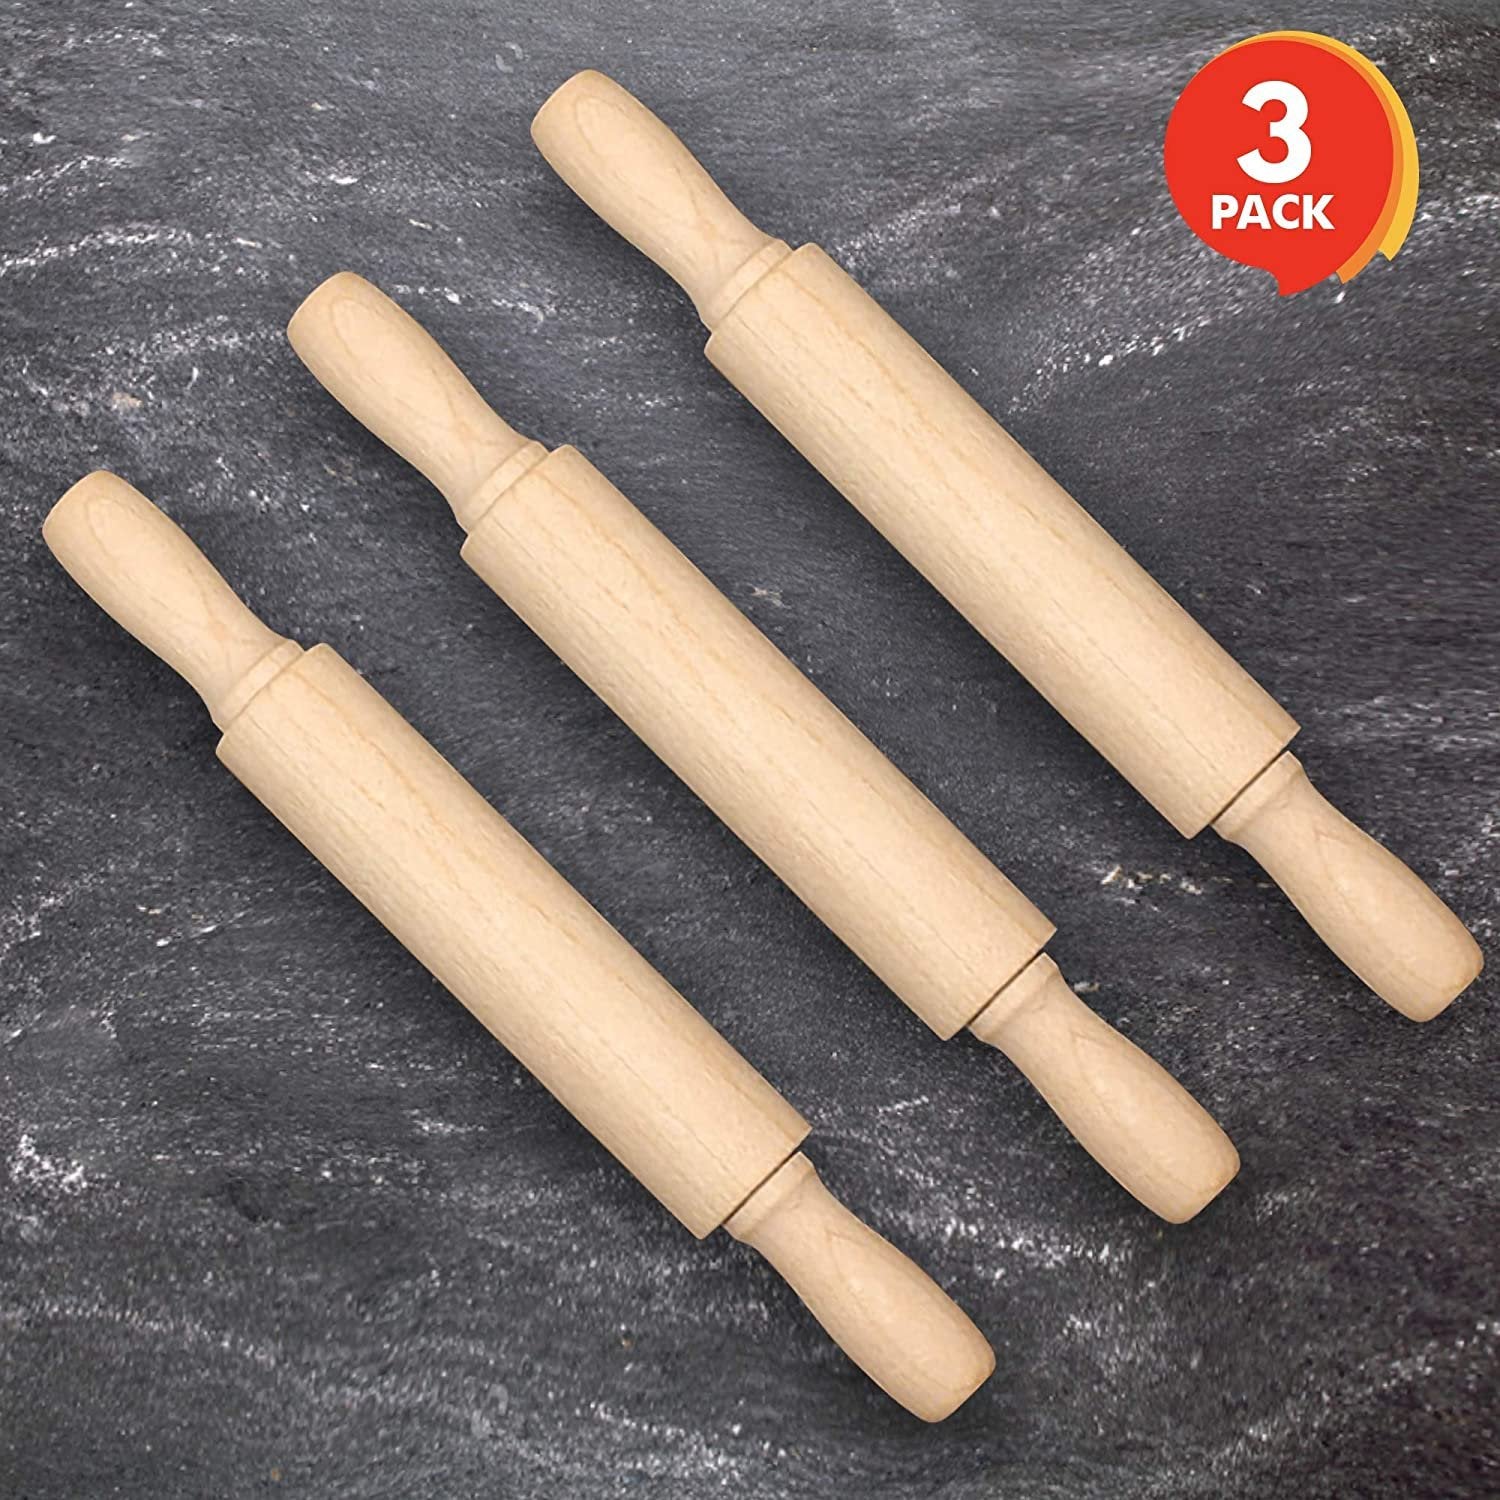 7" Mini Rolling Pins for Kids - Set of 3 - Small Wooden Rollers for Baking, Cooking, Play Doh, Clay, Cookie Dough - Arts and Crafts Toy Supplies for Boys and Girls